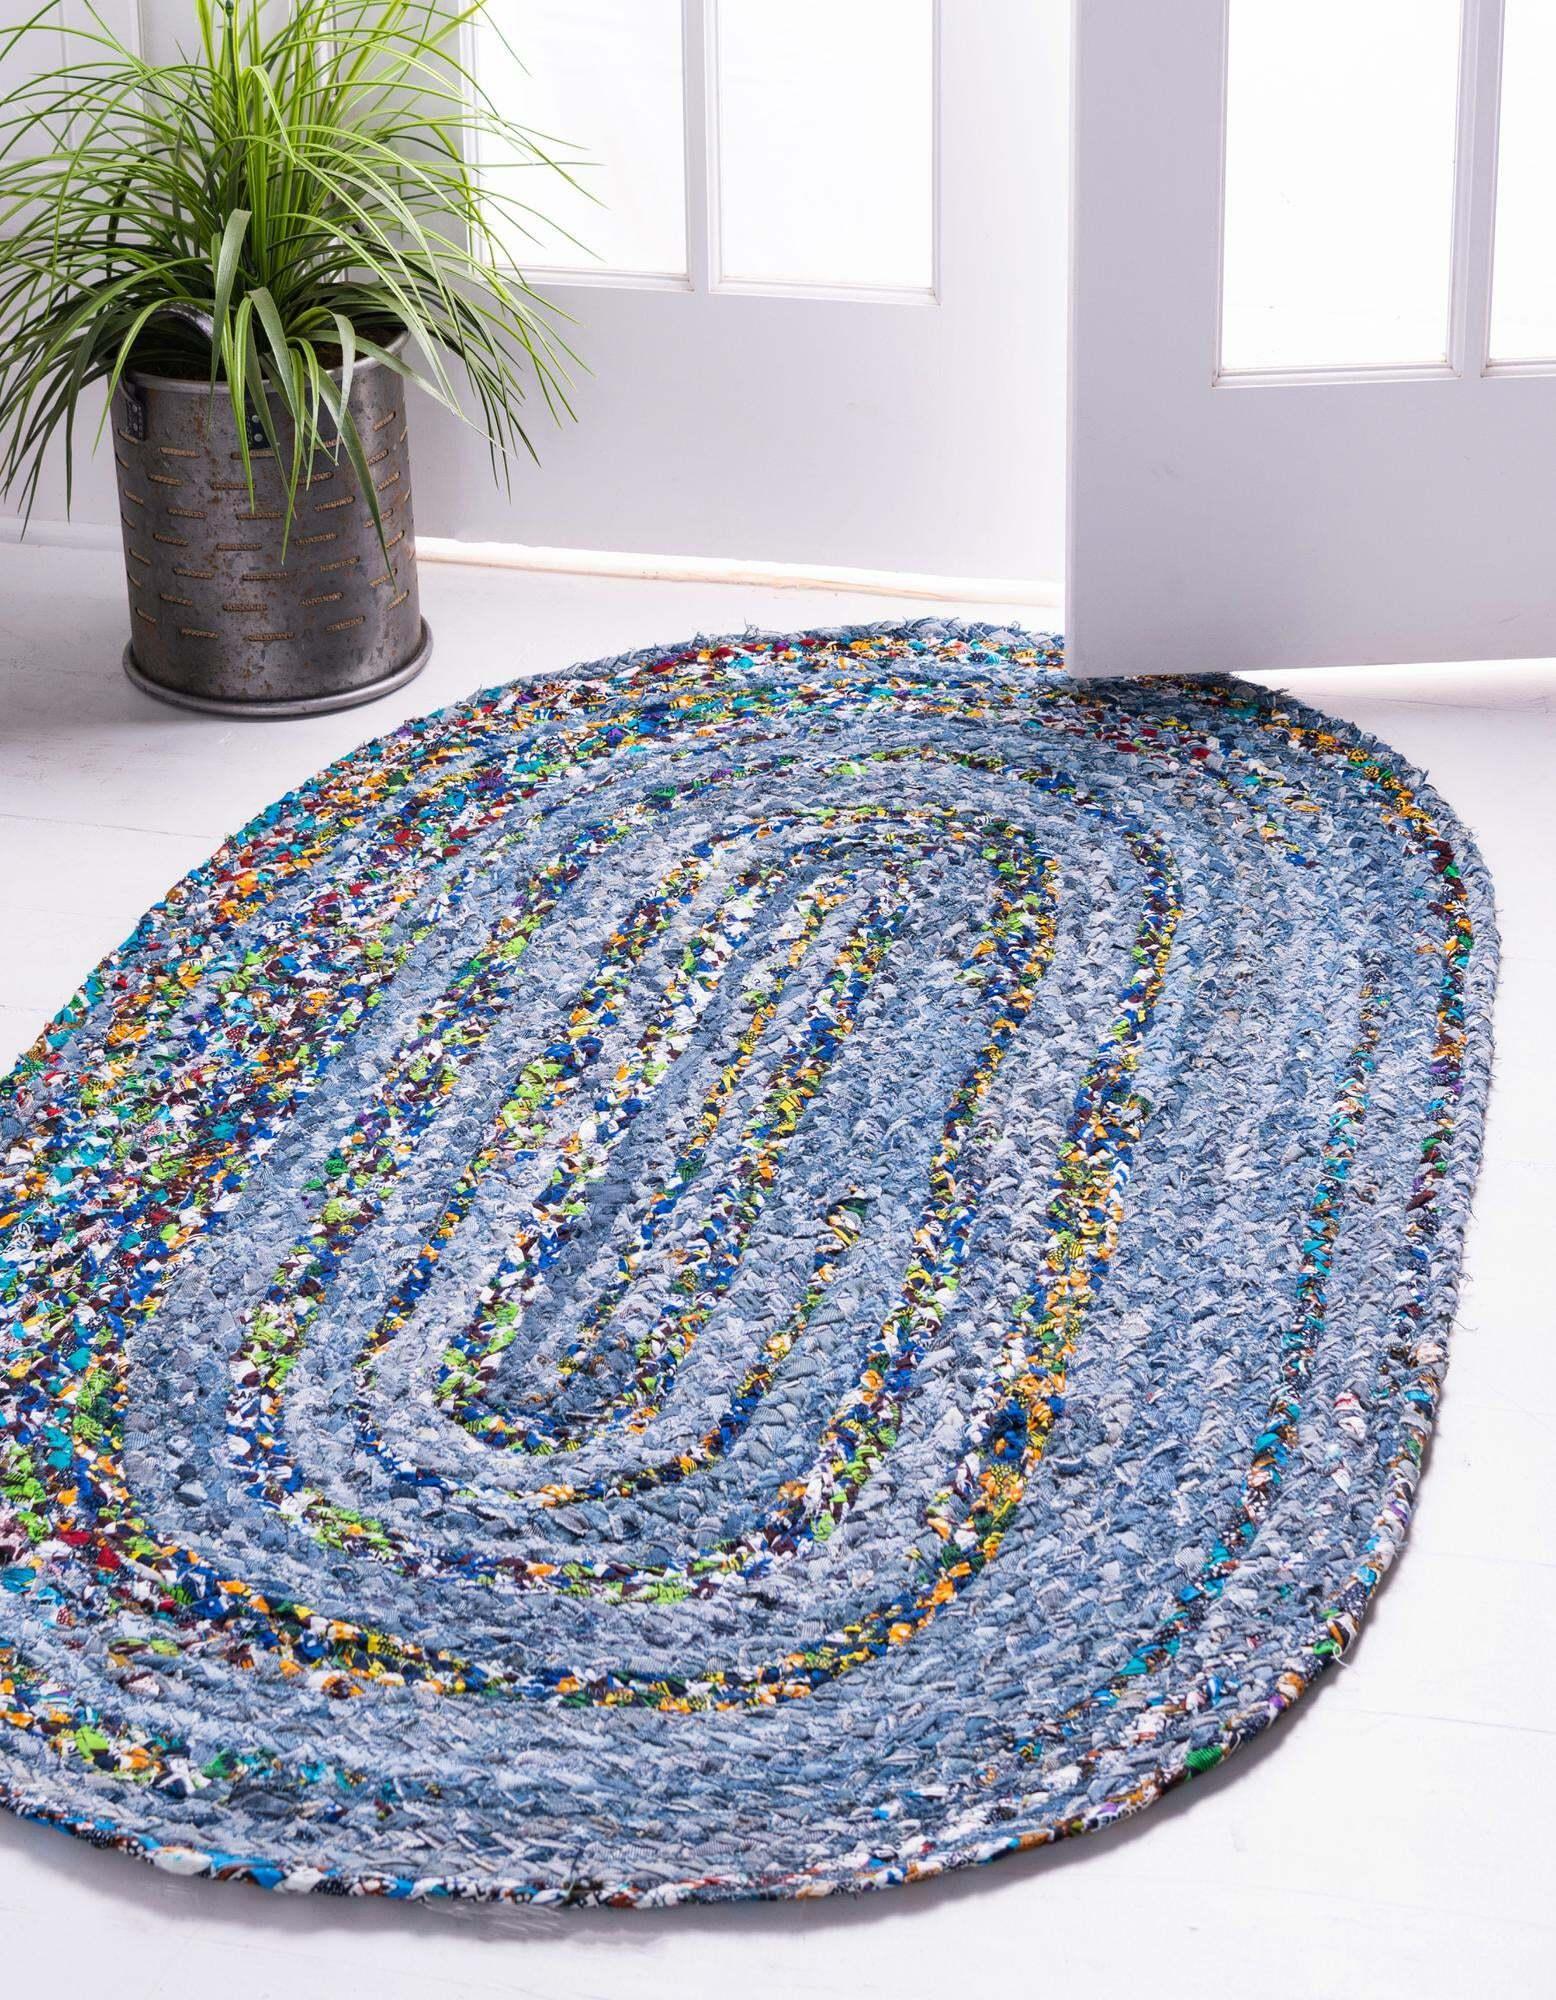 Unique Loom Indoor Rugs - Braided Chindi Abstract Oval 8x10 Oval Rug Blue & Multi